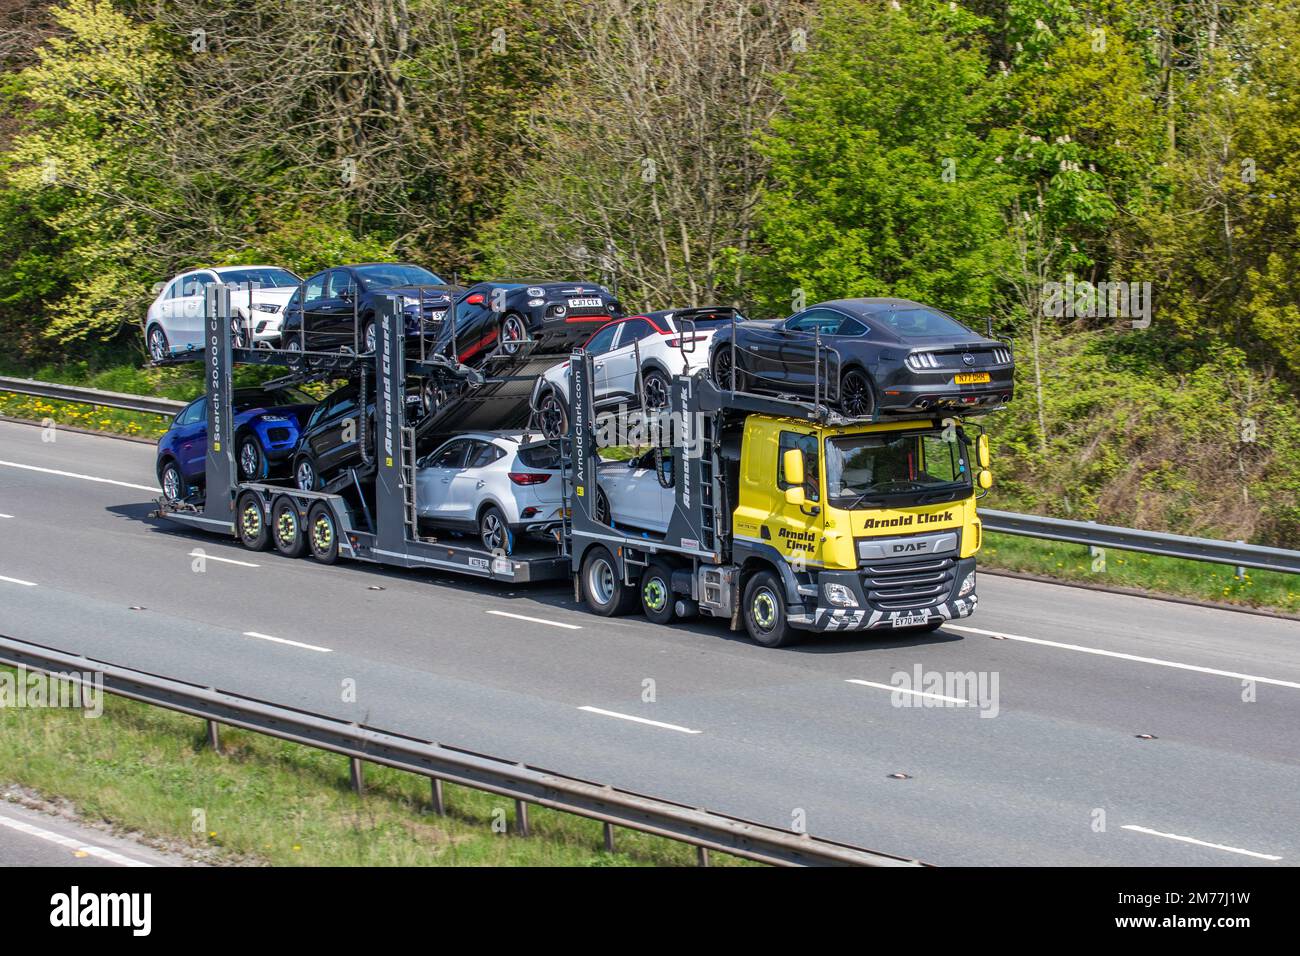 ARNOLD CLARK Car carrier. DAF Trucks 450FTP 9 vehicle car transporter, Haulage delivery trucks, collection and deliveries, lorry, transportation, cars & truck, cargo, DAF vehicle, delivery, commercial transport, industry, on the M61 at Chorley, UK Stock Photo